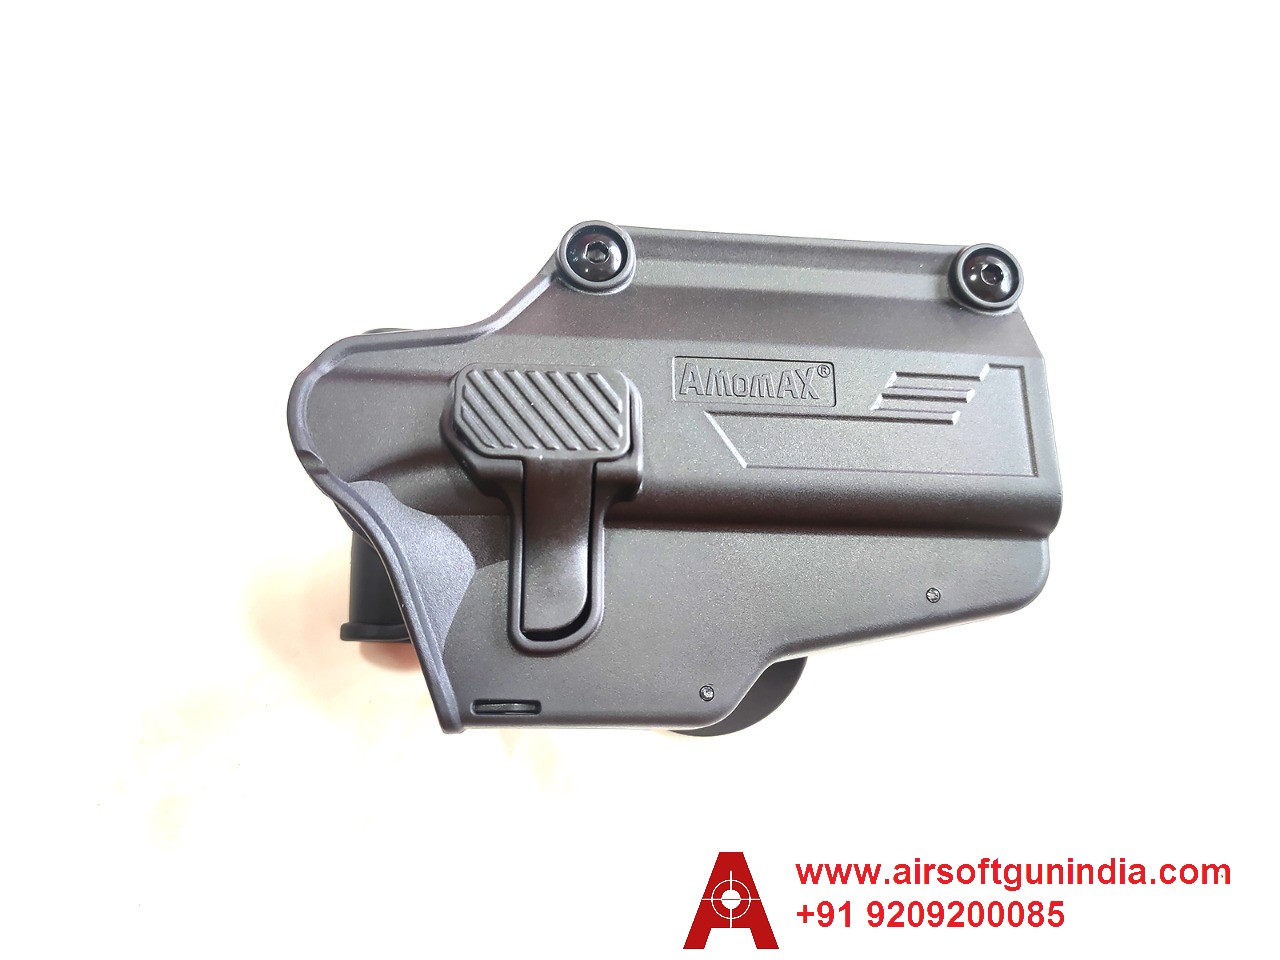 Holster For Colt Special Combat 1911 Air Pistol By Airsoft Gun India